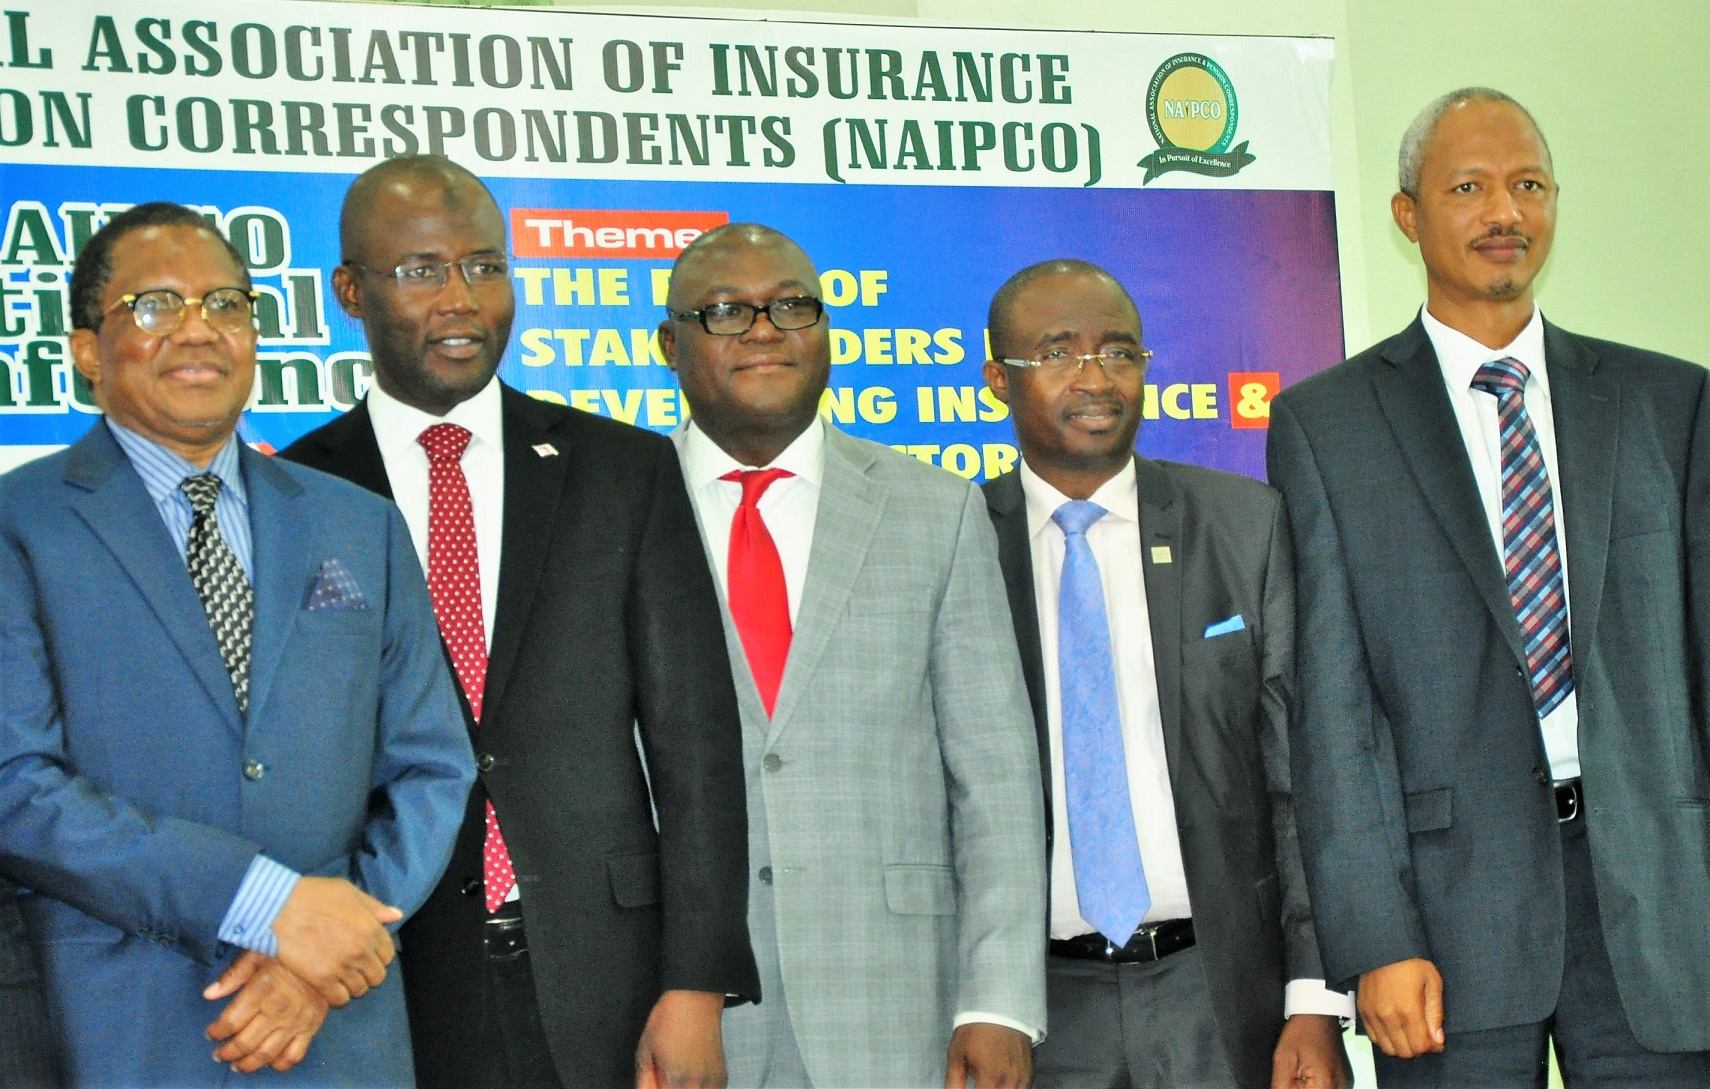 L-R: Alhaji Bala Zakariya’u, past president, Chartered Insurance Institute of Nigeria and Chairman of occasion; Mr Moruf Apampa, Managing Director/CEO, SUNU Assurance Plc; Mr Adebayo Adeleke, Managing Director, Lancelot Ventures Ltd; Mr. Supo Sogolola, Executive Director, Law Union & Rock Insurance, and Dr. Farouk Aminu, Head, Research and Strategy Management Department, Pencom, during the  3rd Annual National Conference of the National Association of Insurance and Pension Correspondents (NAIPCO) on The Role of Stakeholders in Developing Insurance and Pension Sectors held in Lagos on Thursday. August 09, 2018.   